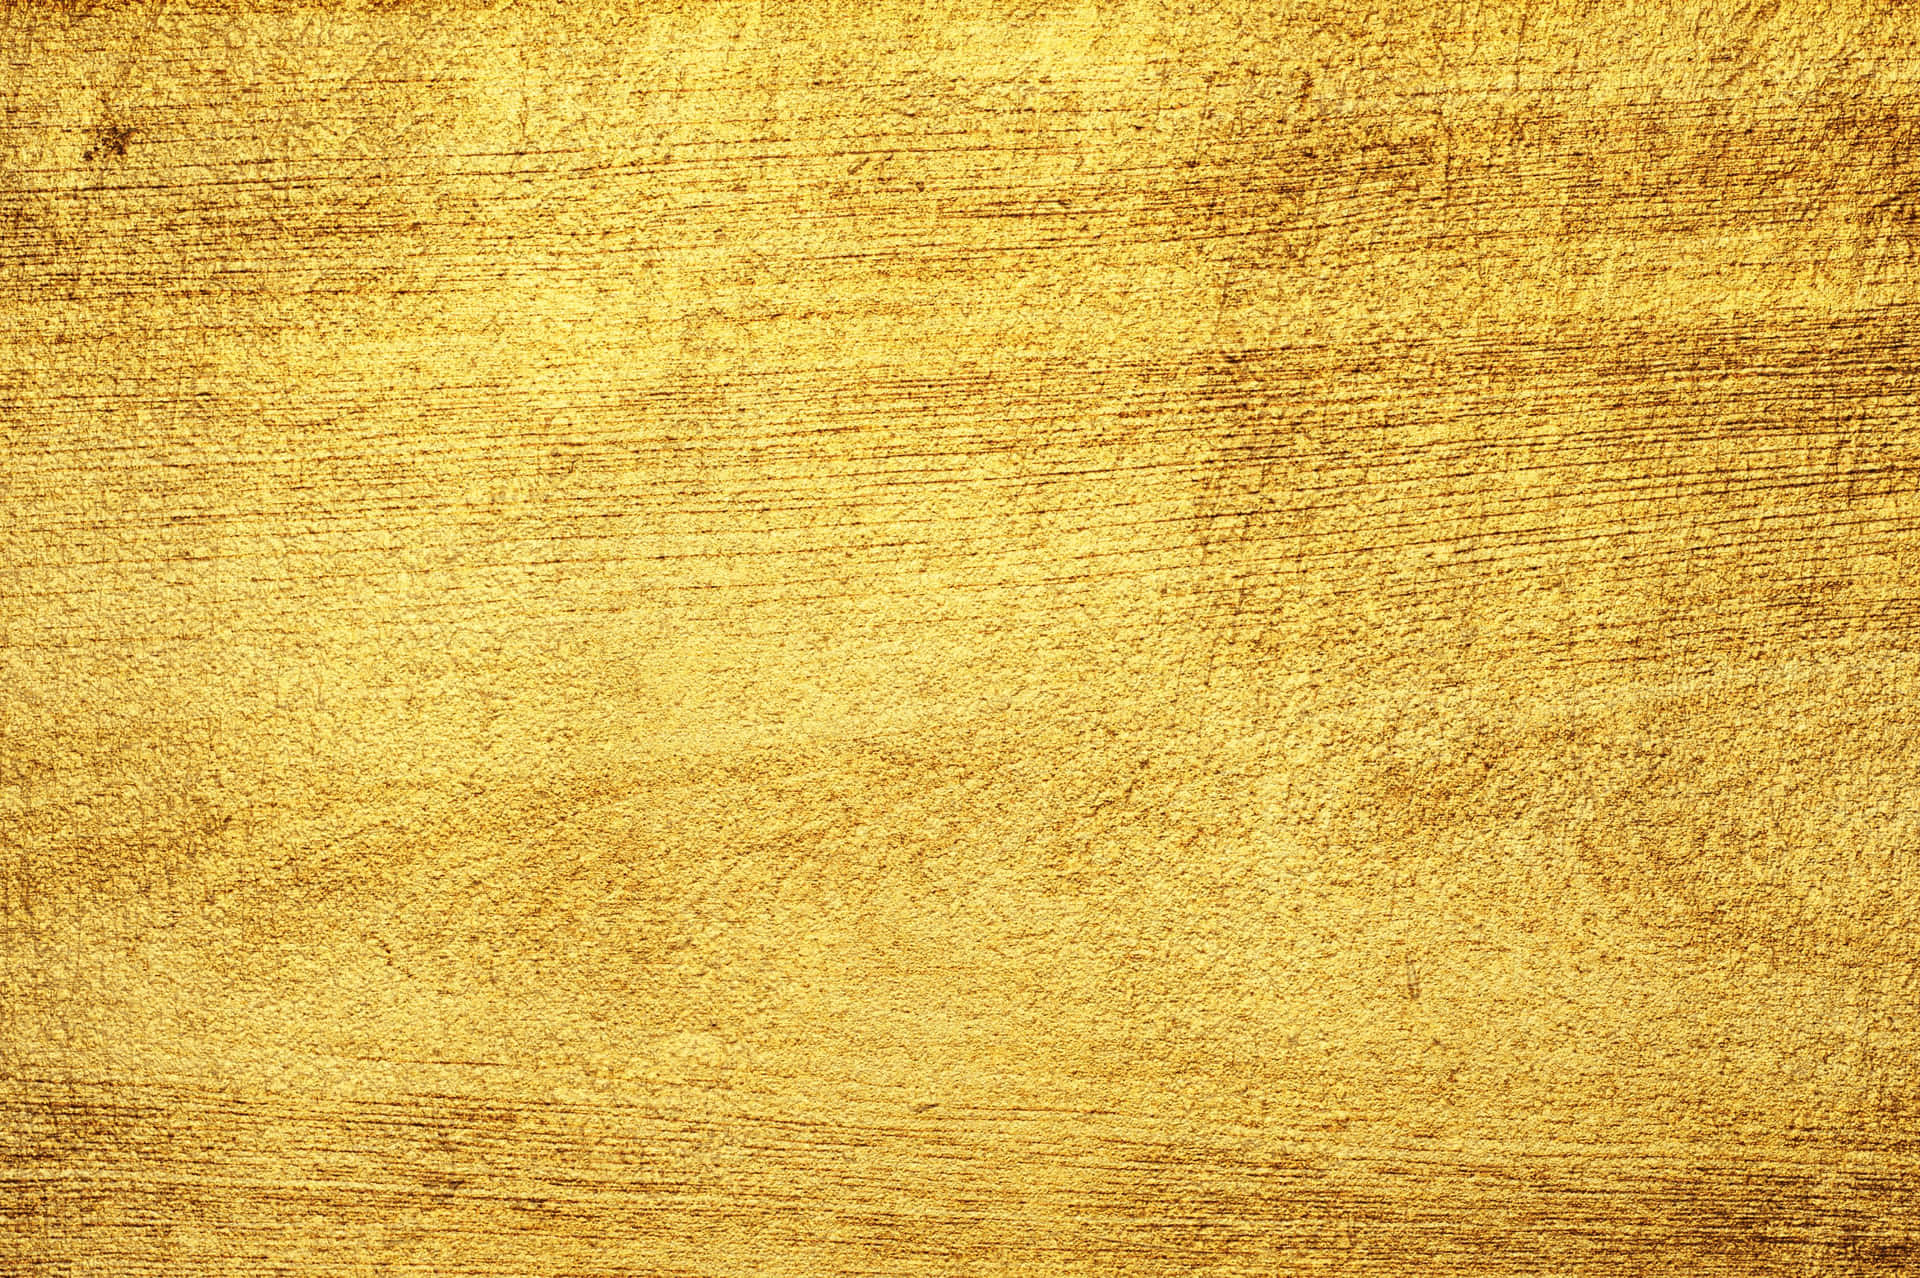 “This yellow grunge texture showcases its unique weathered texture contrasted with an abstract background.” Wallpaper